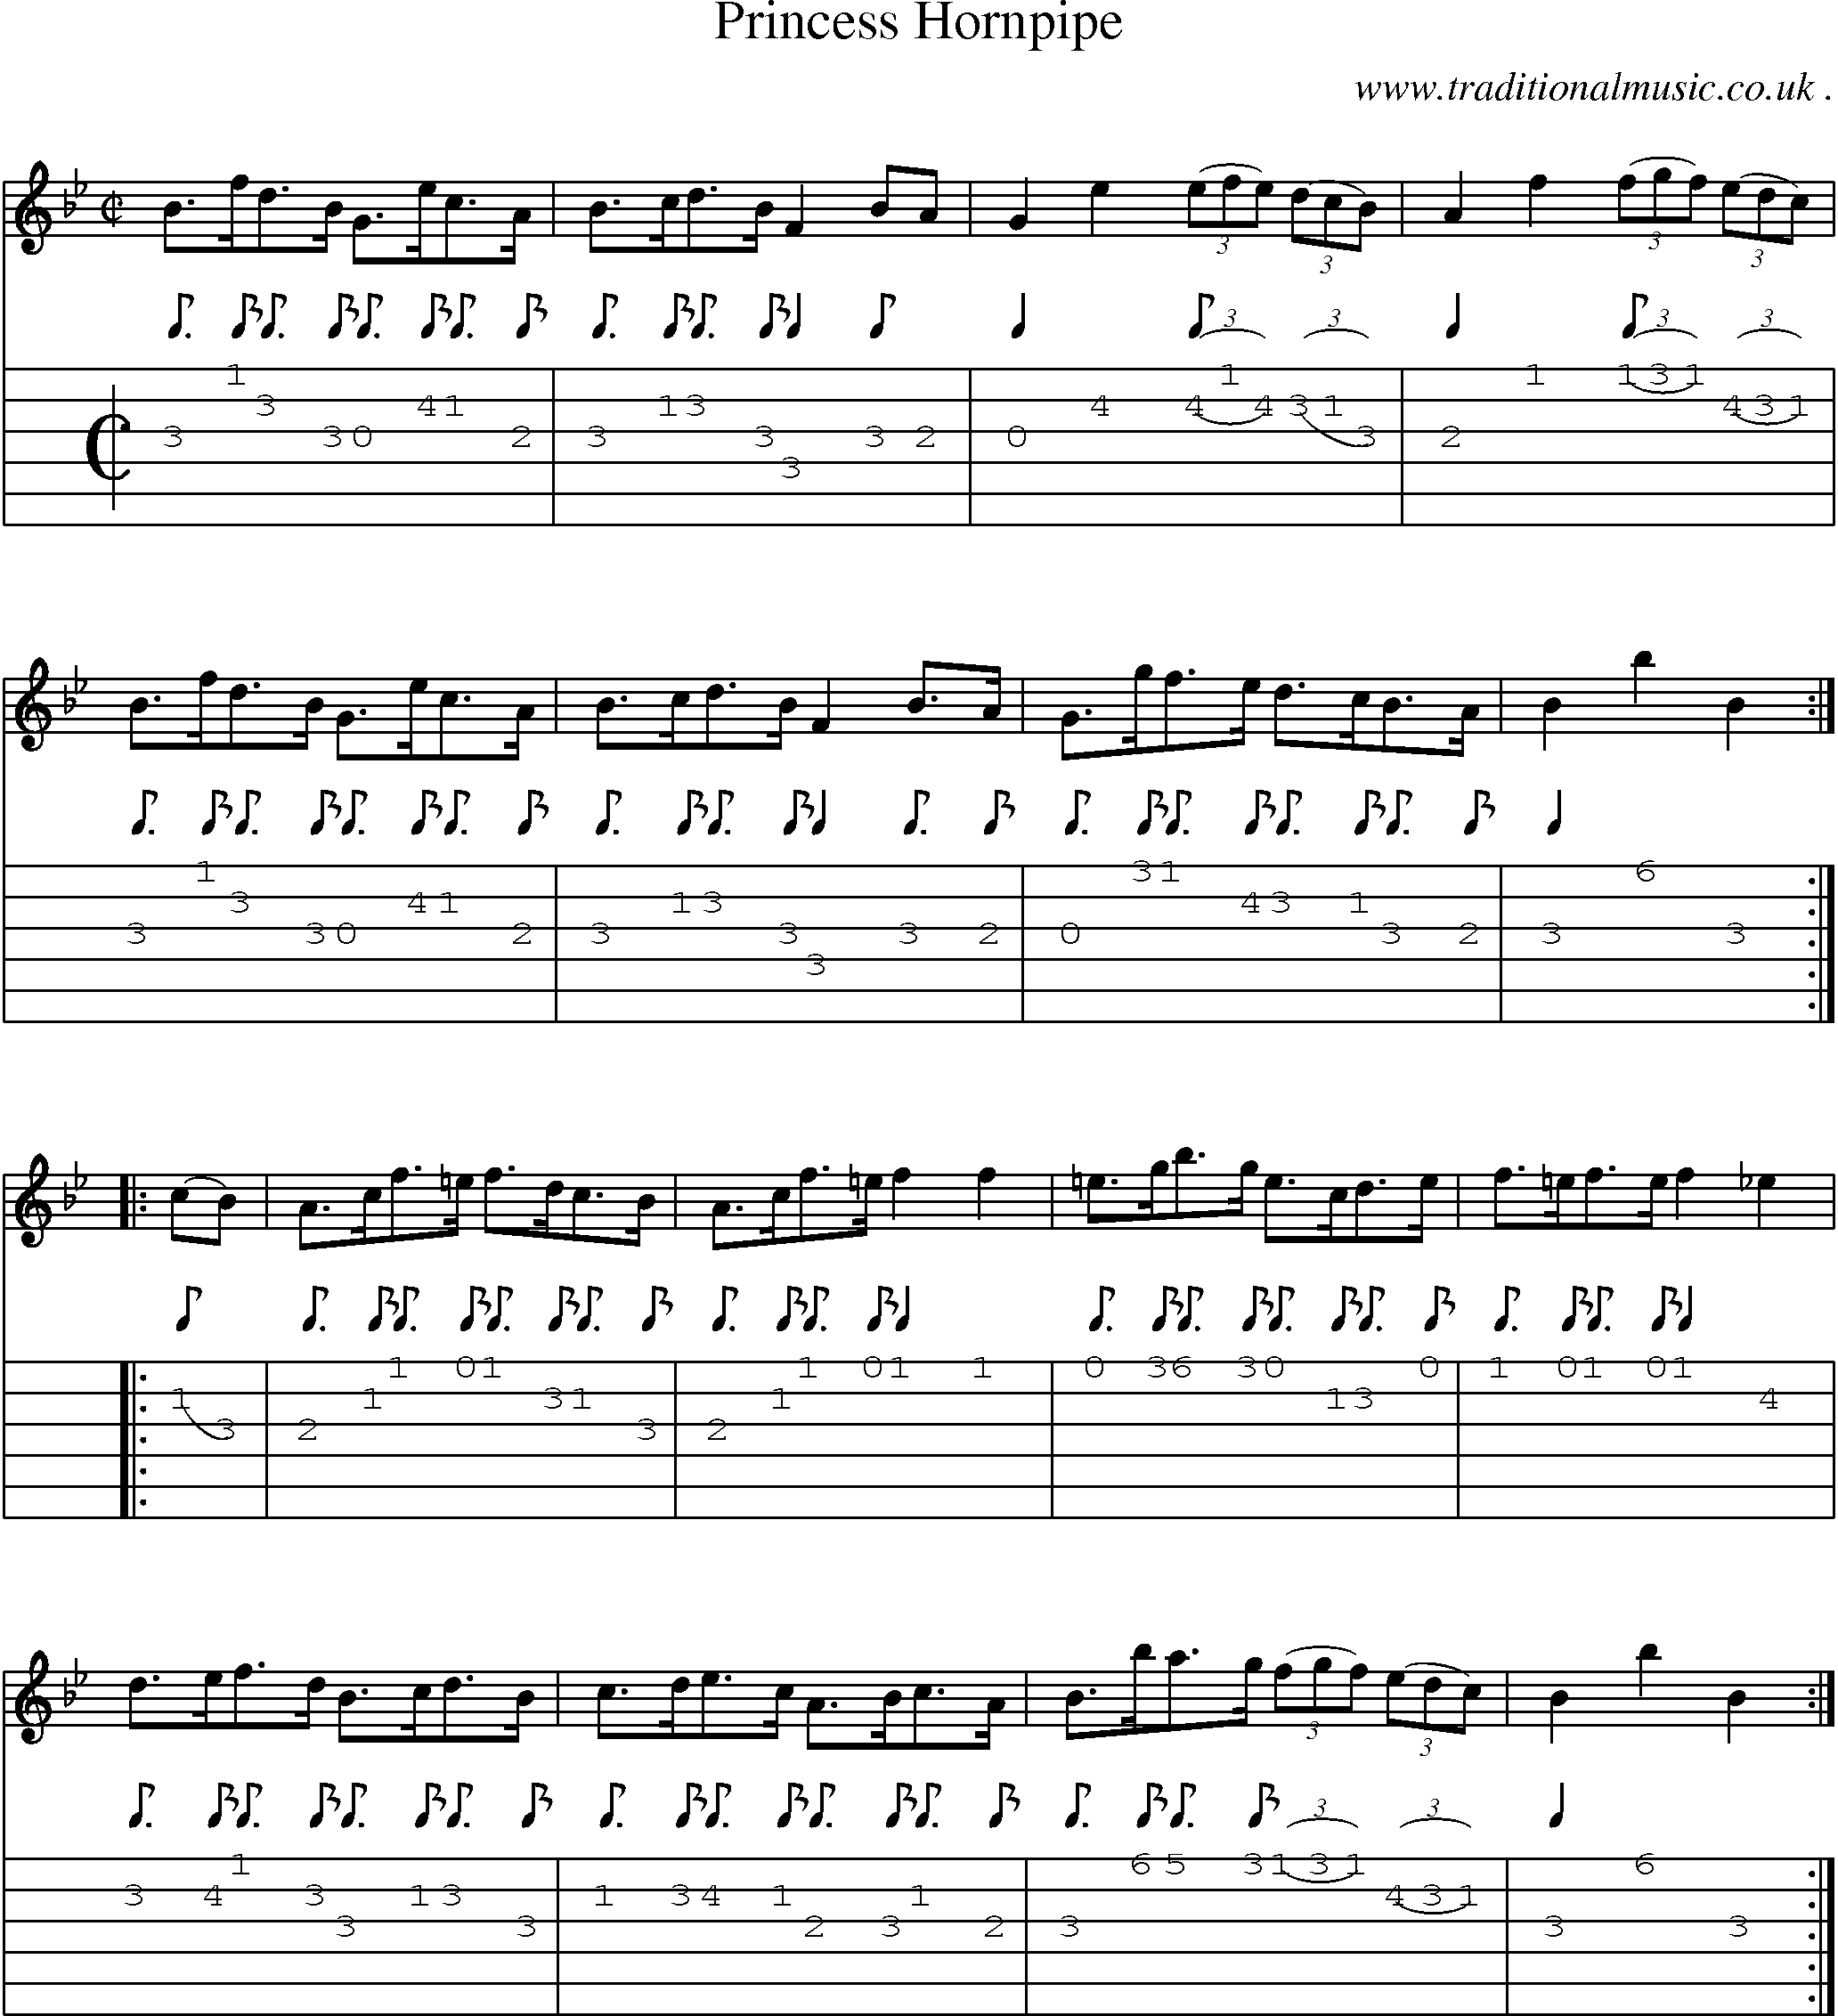 Sheet-Music and Guitar Tabs for Princess Hornpipe